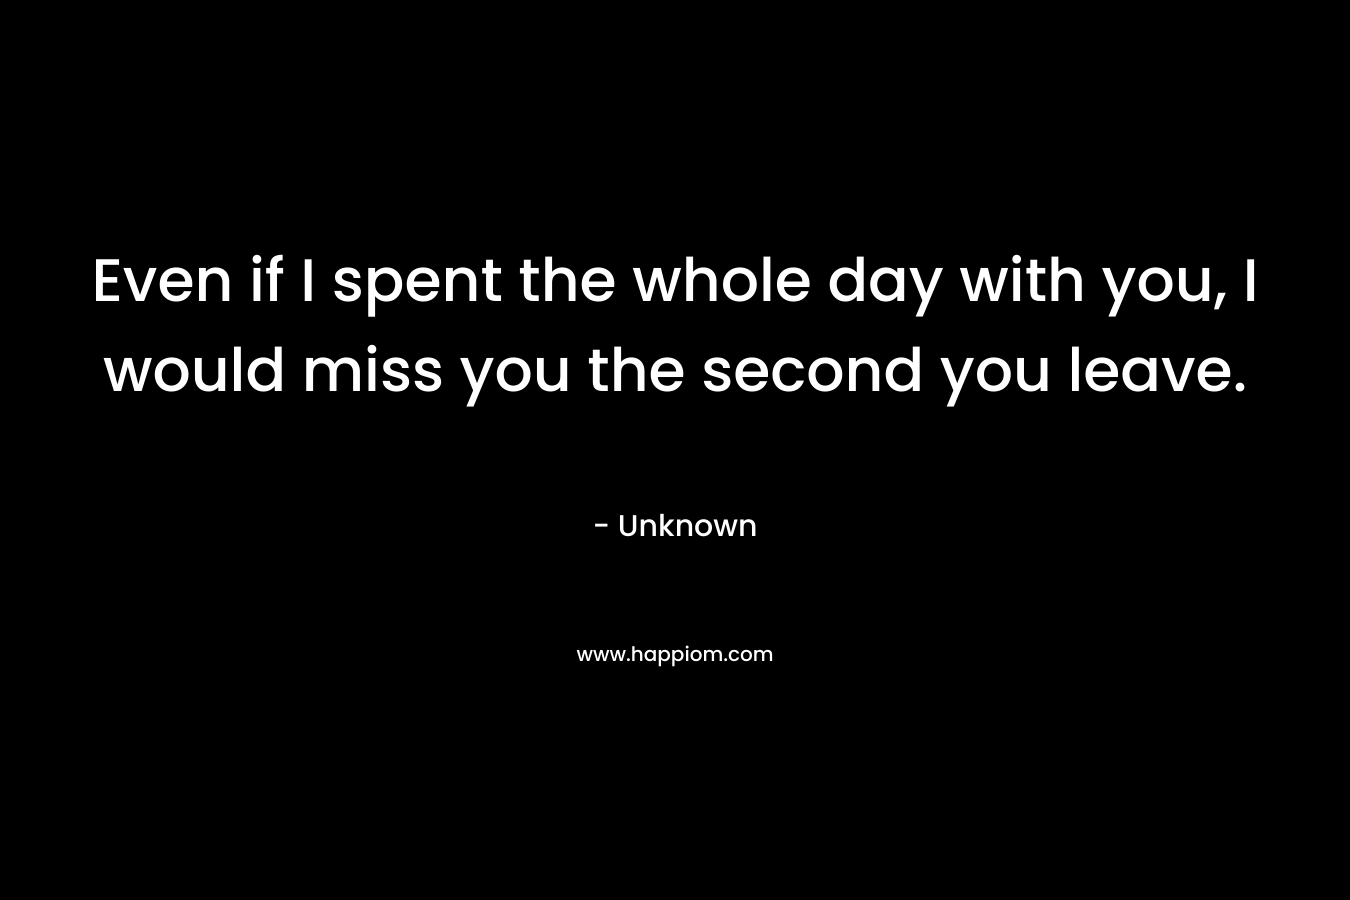 Even if I spent the whole day with you, I would miss you the second you leave.